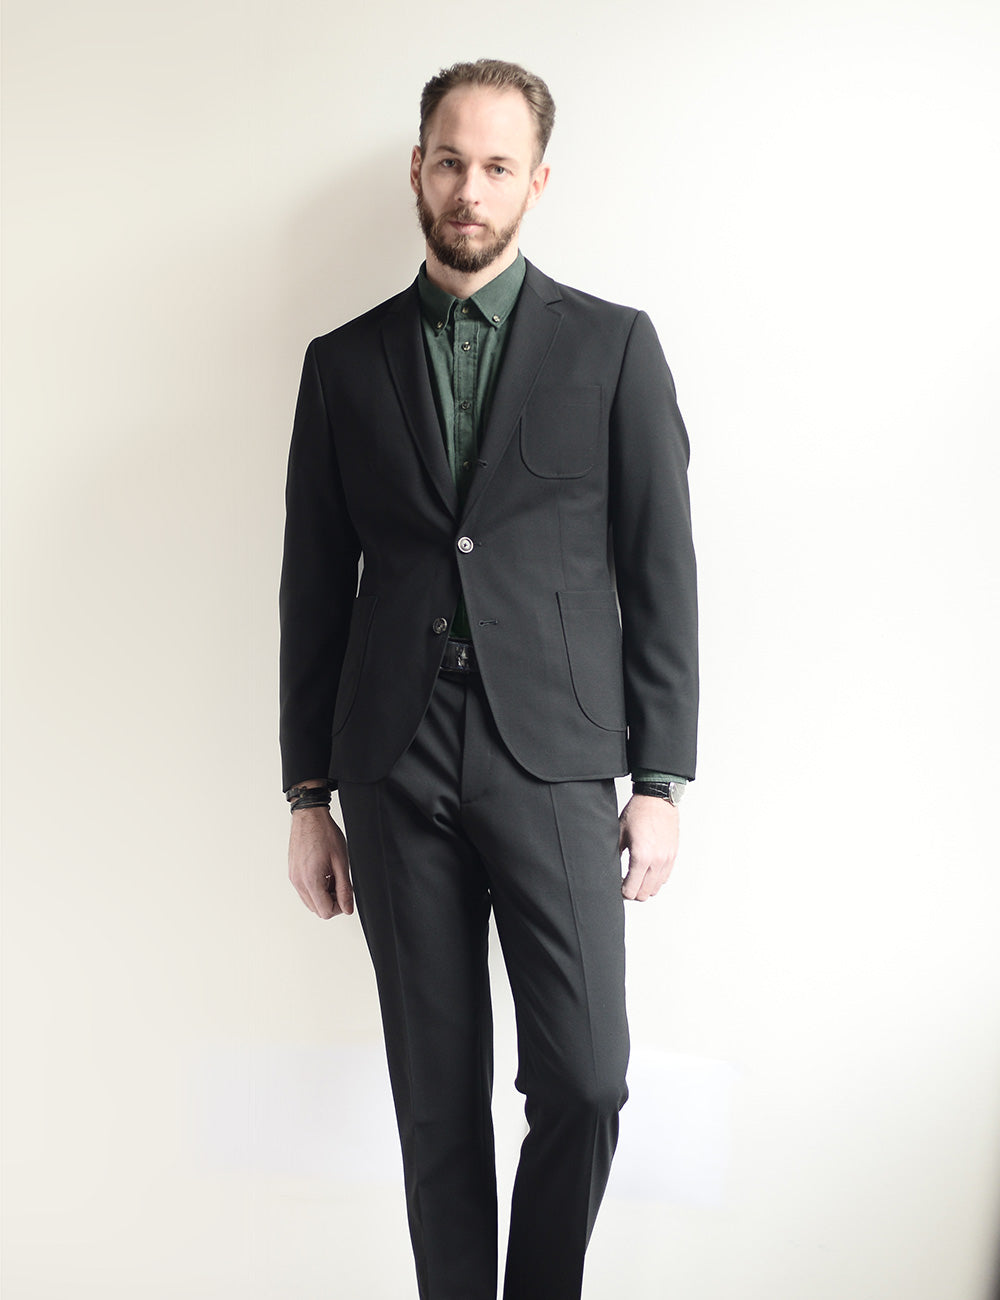 Model wears black casual suit with green button down shirt.